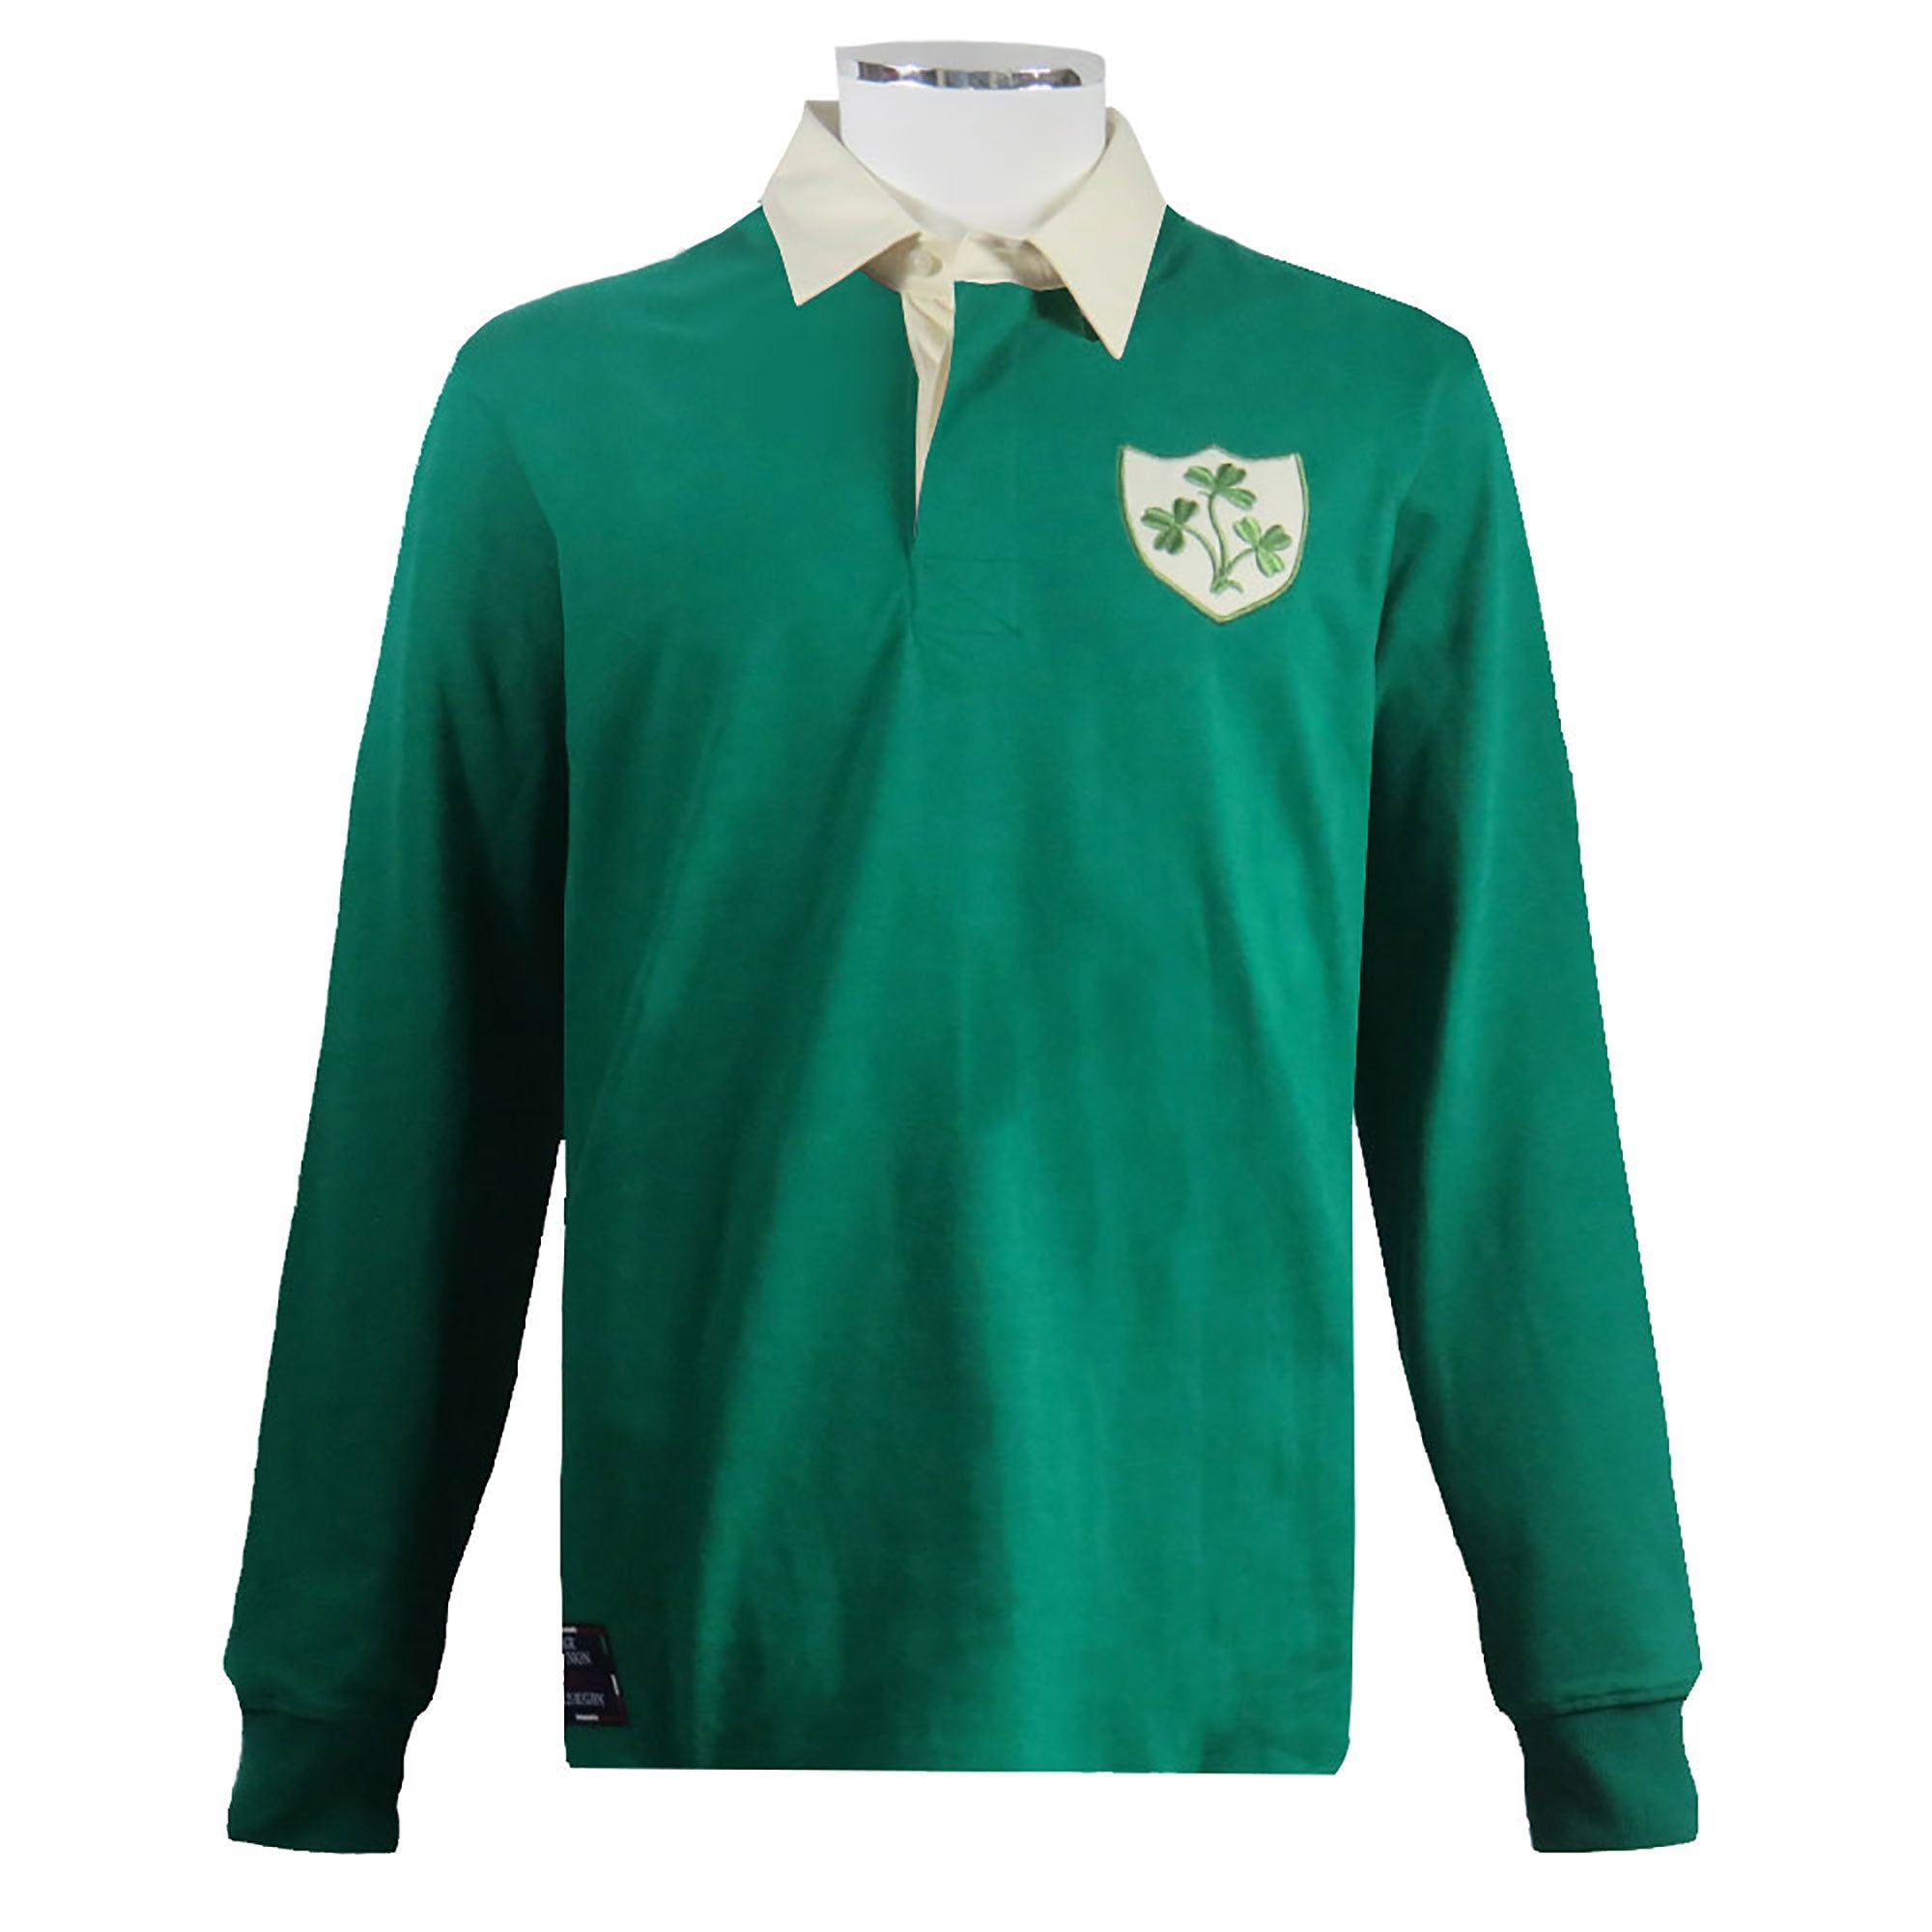 Mens Rugby Jerseys | Rugby Clothing | Absolute Rugby